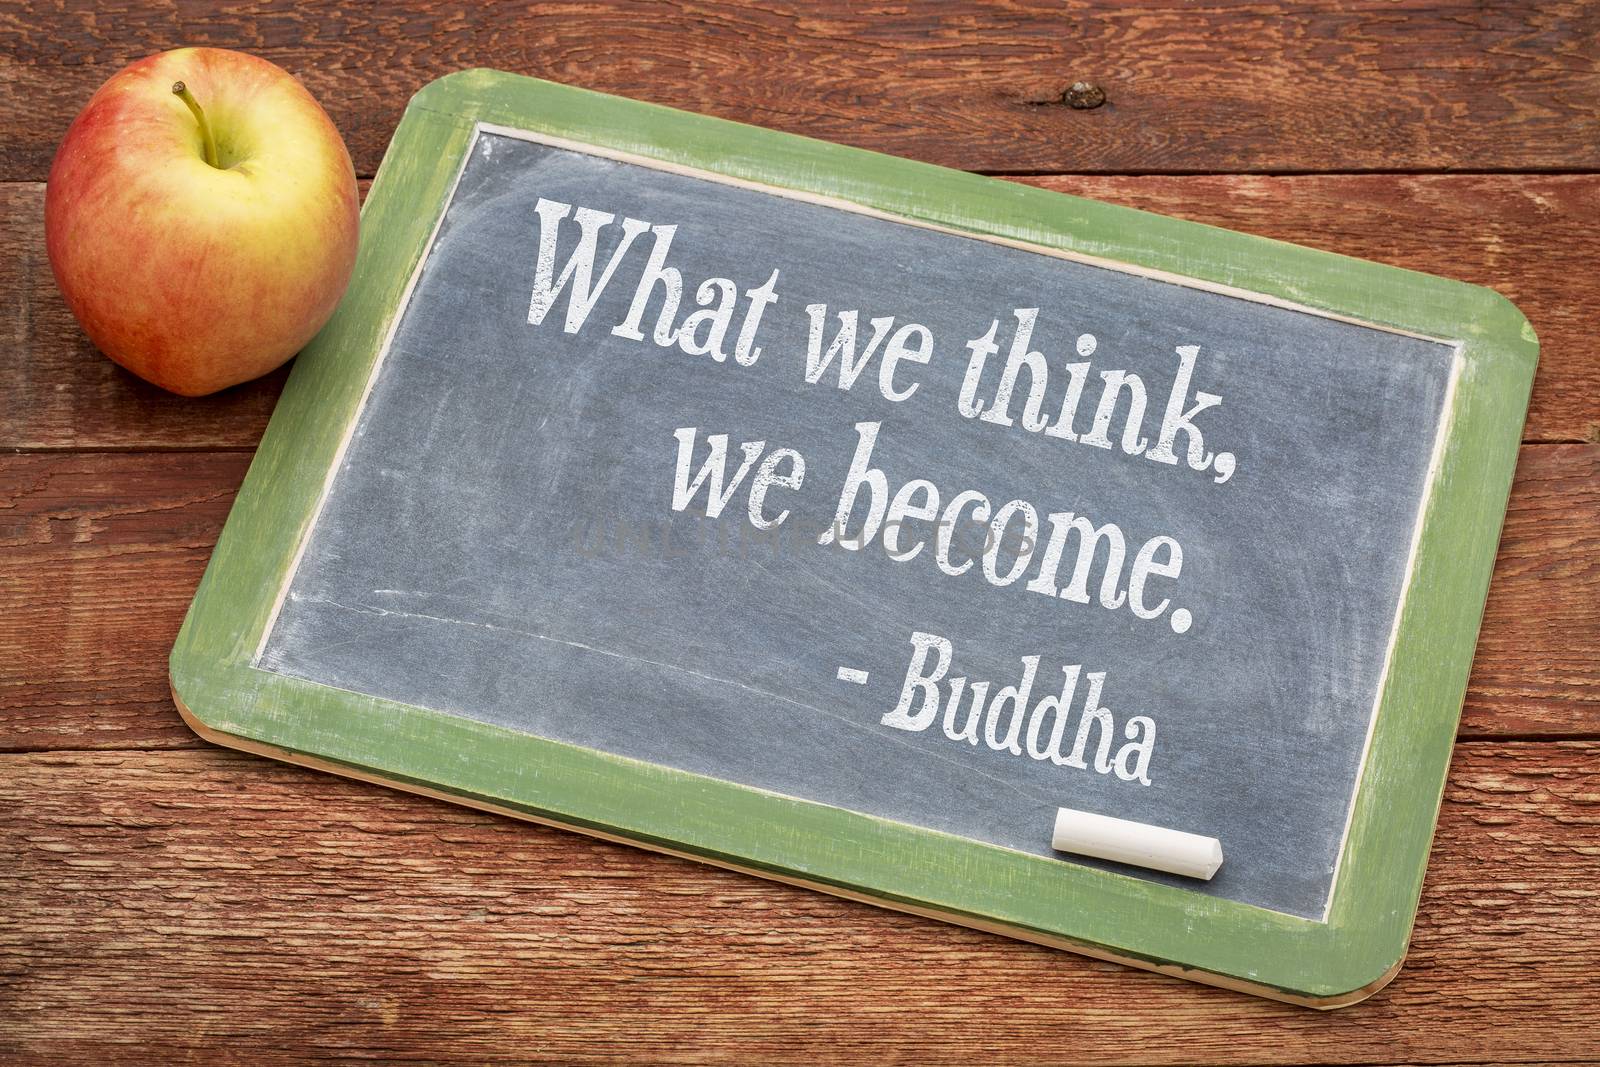 What we think we become - Buddha quote  on a slate blackboard against red barn wood